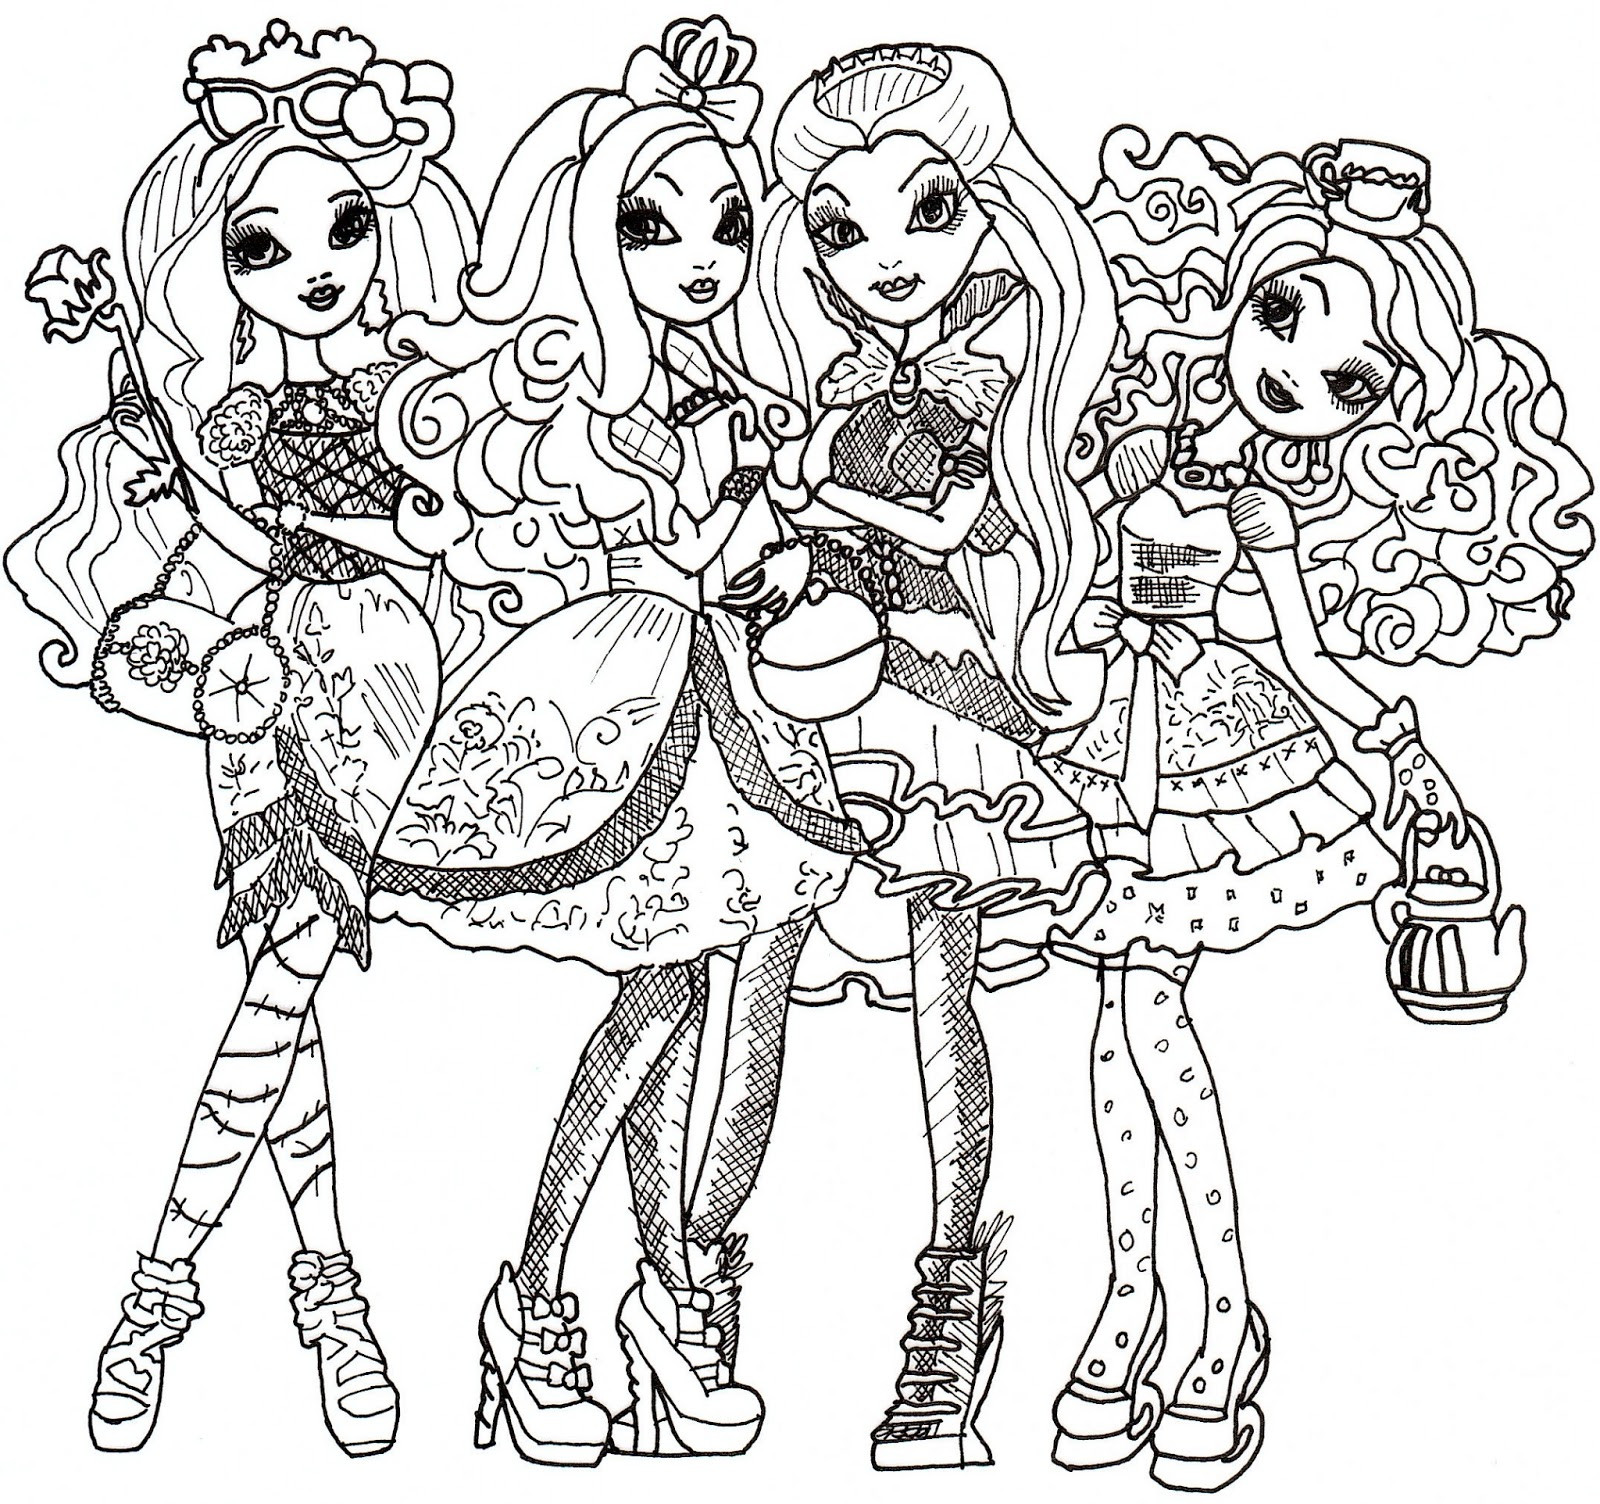 Ever After High Coloring Pages Printable
 Free Printable Ever After High Coloring Pages June 2013